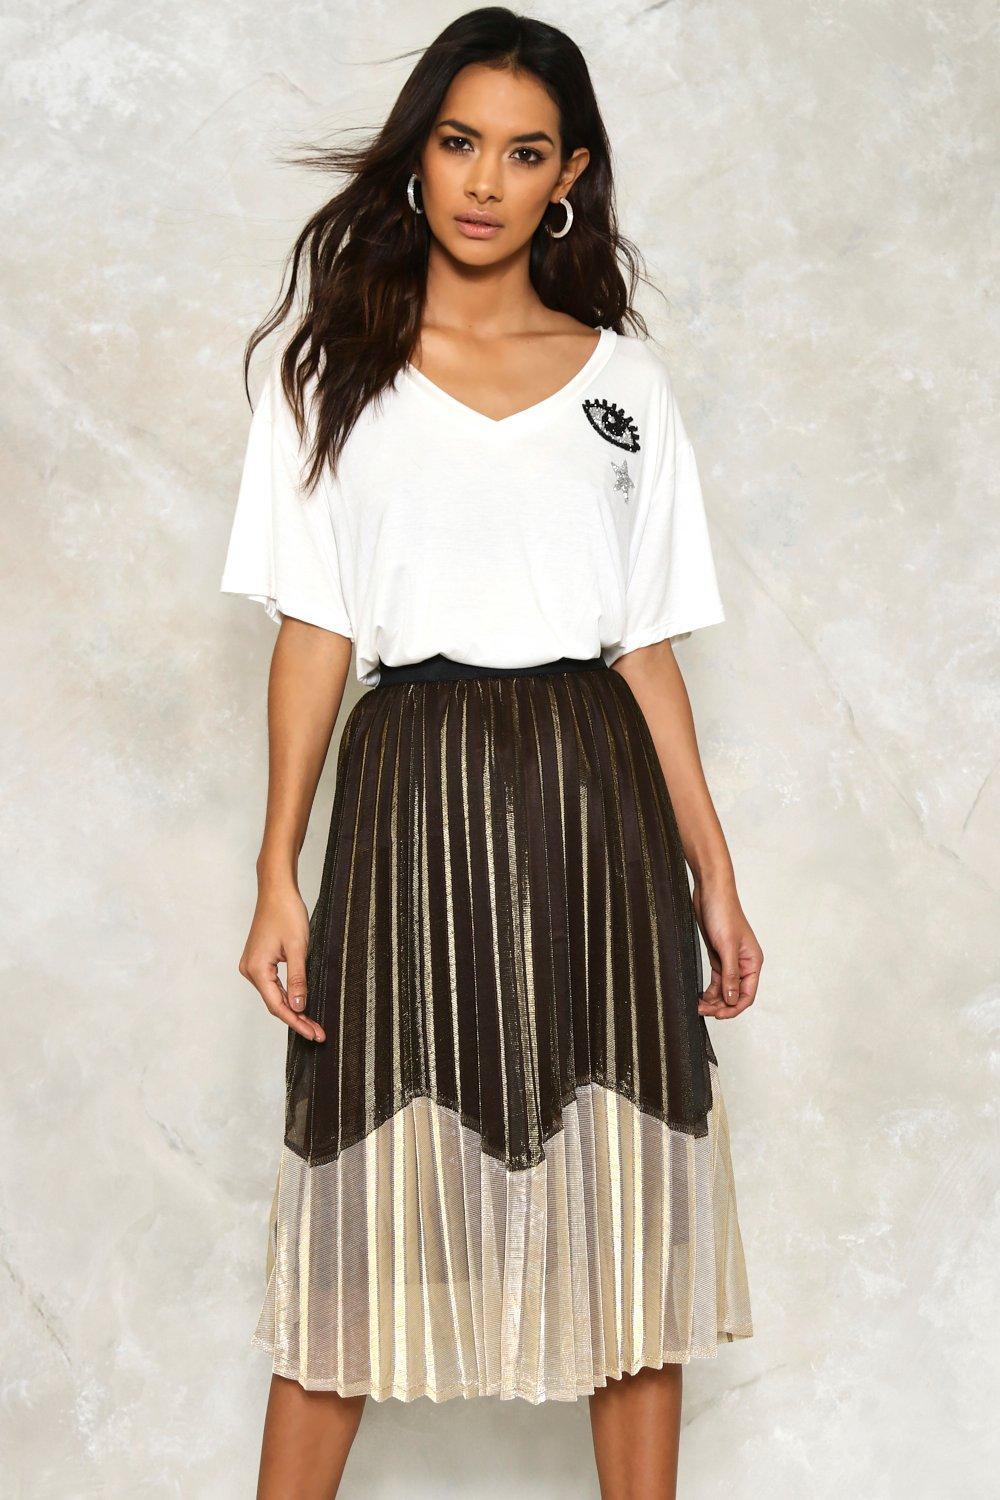 Skirts | Shop New High Waisted Skirts, Minis & Maxis At Nasty Gal